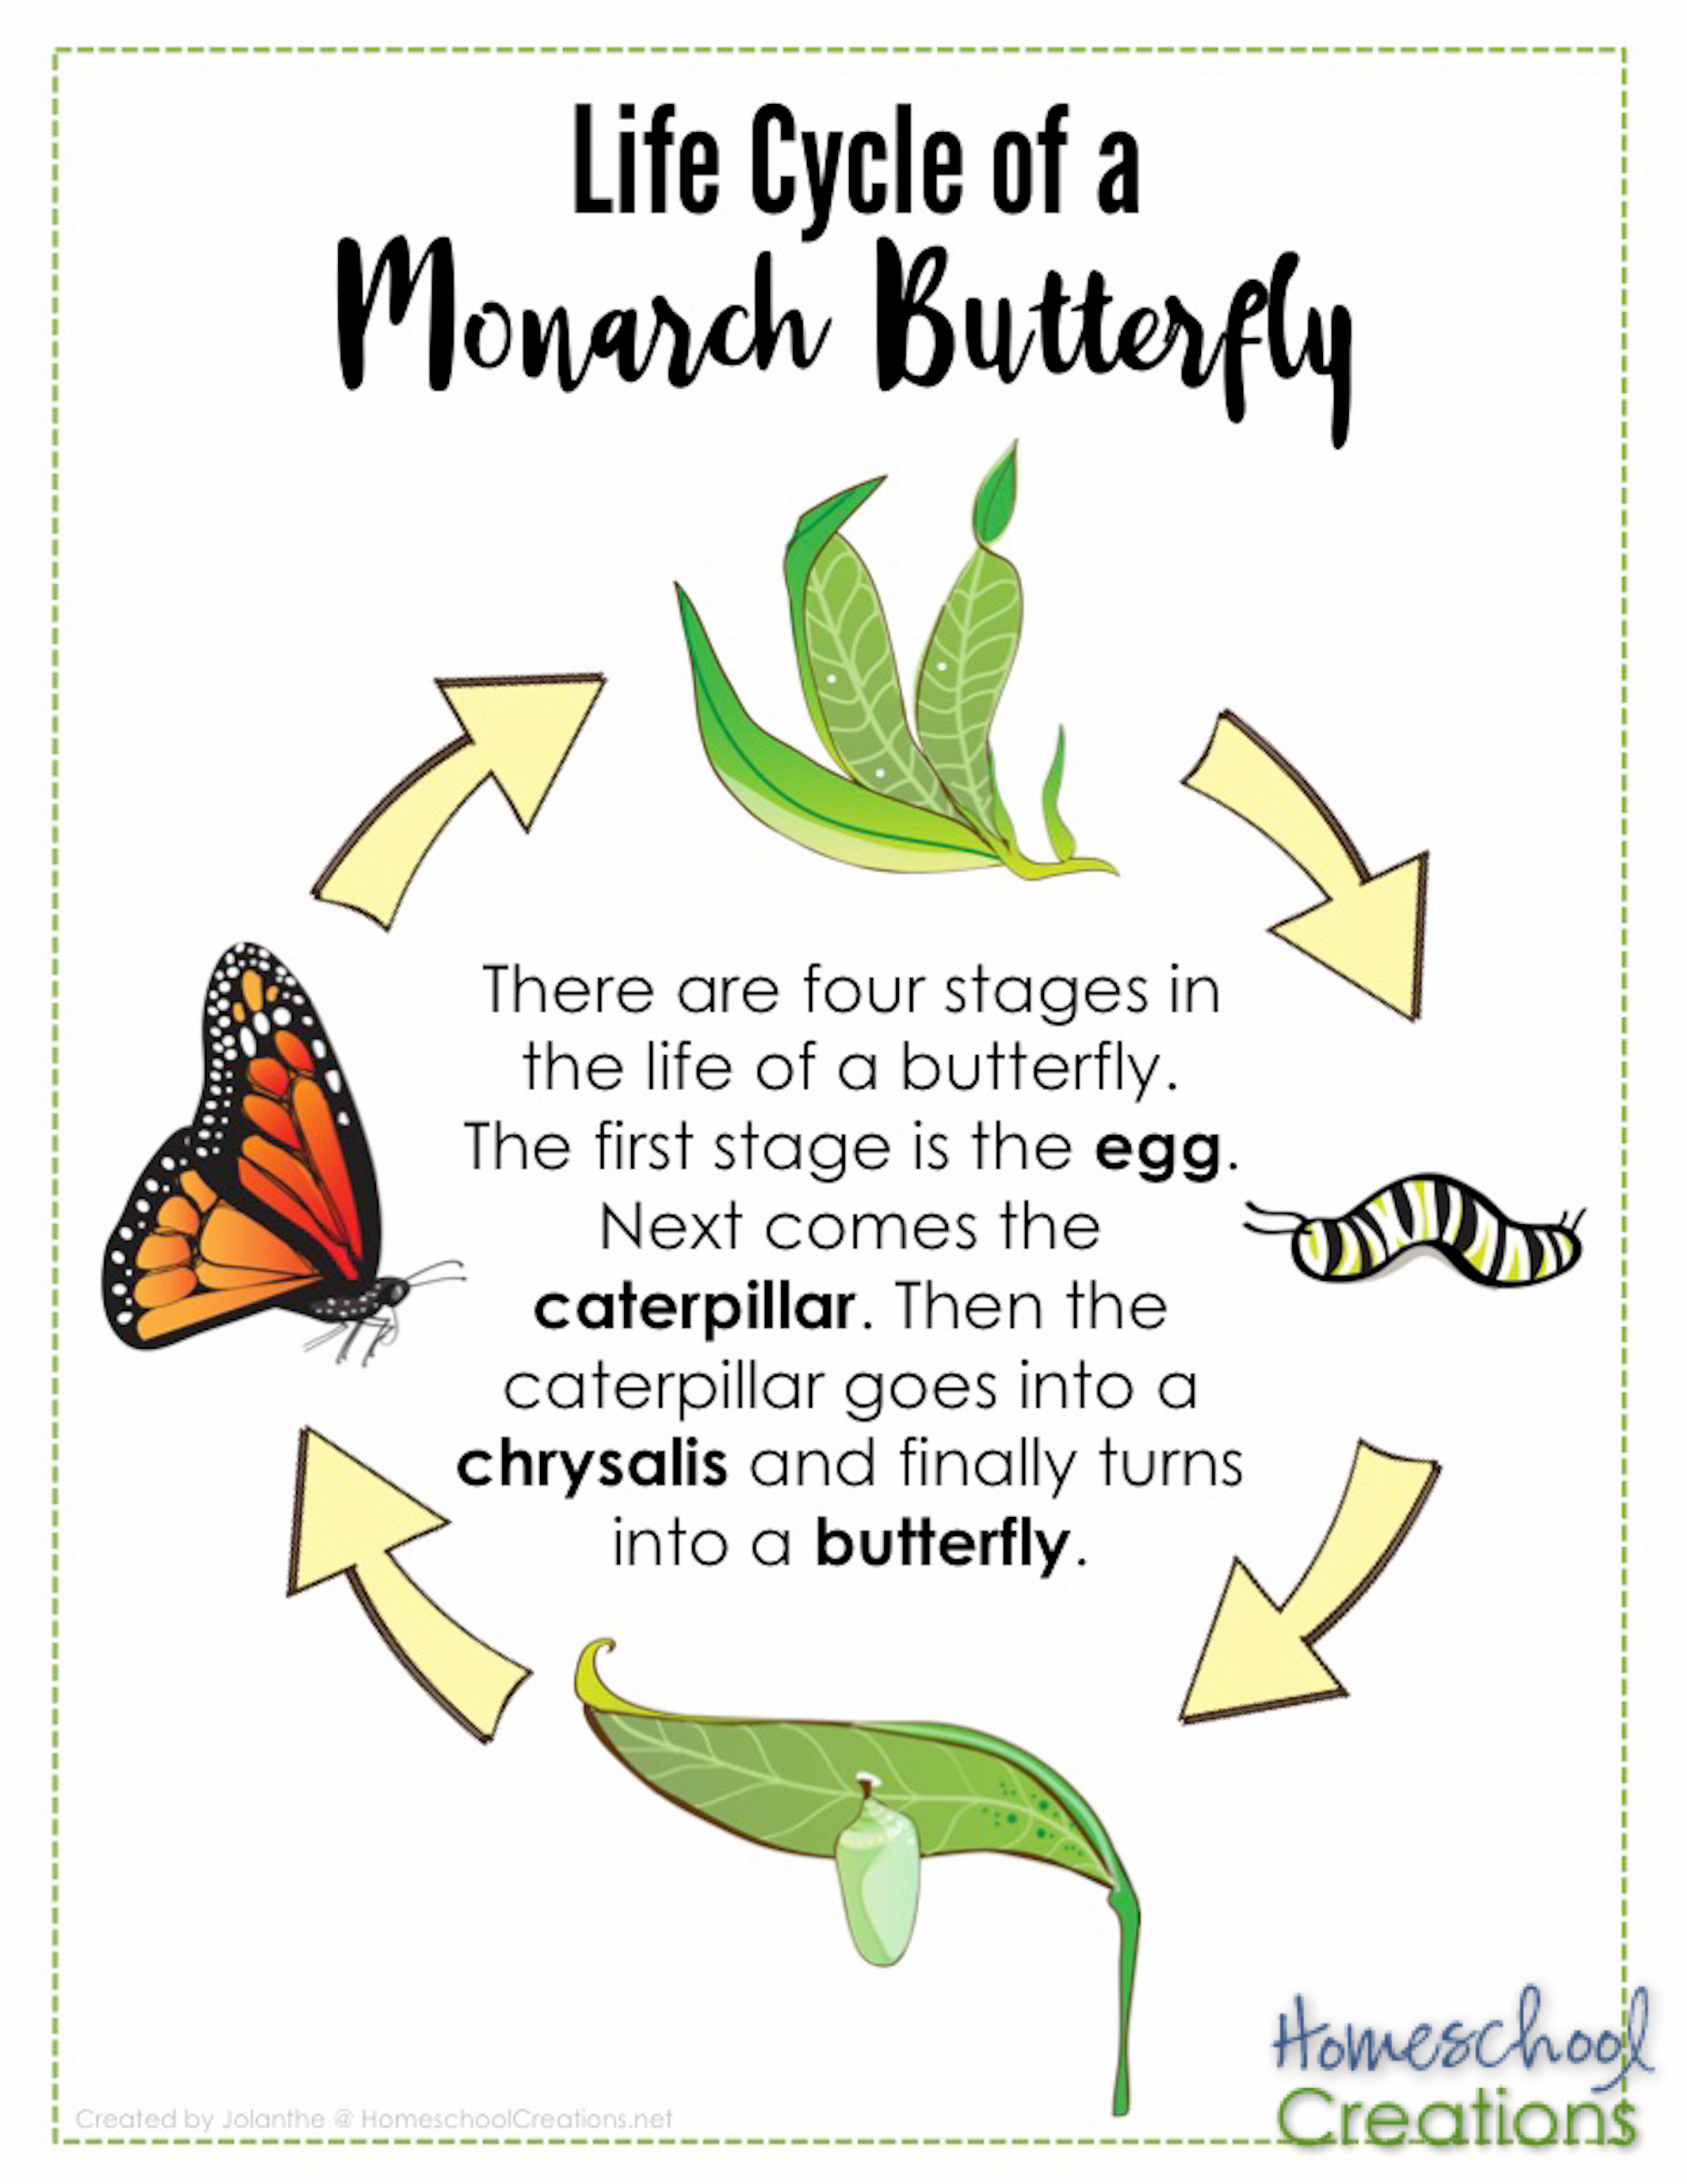 Life Cycle of Monarch Butterfly Poster